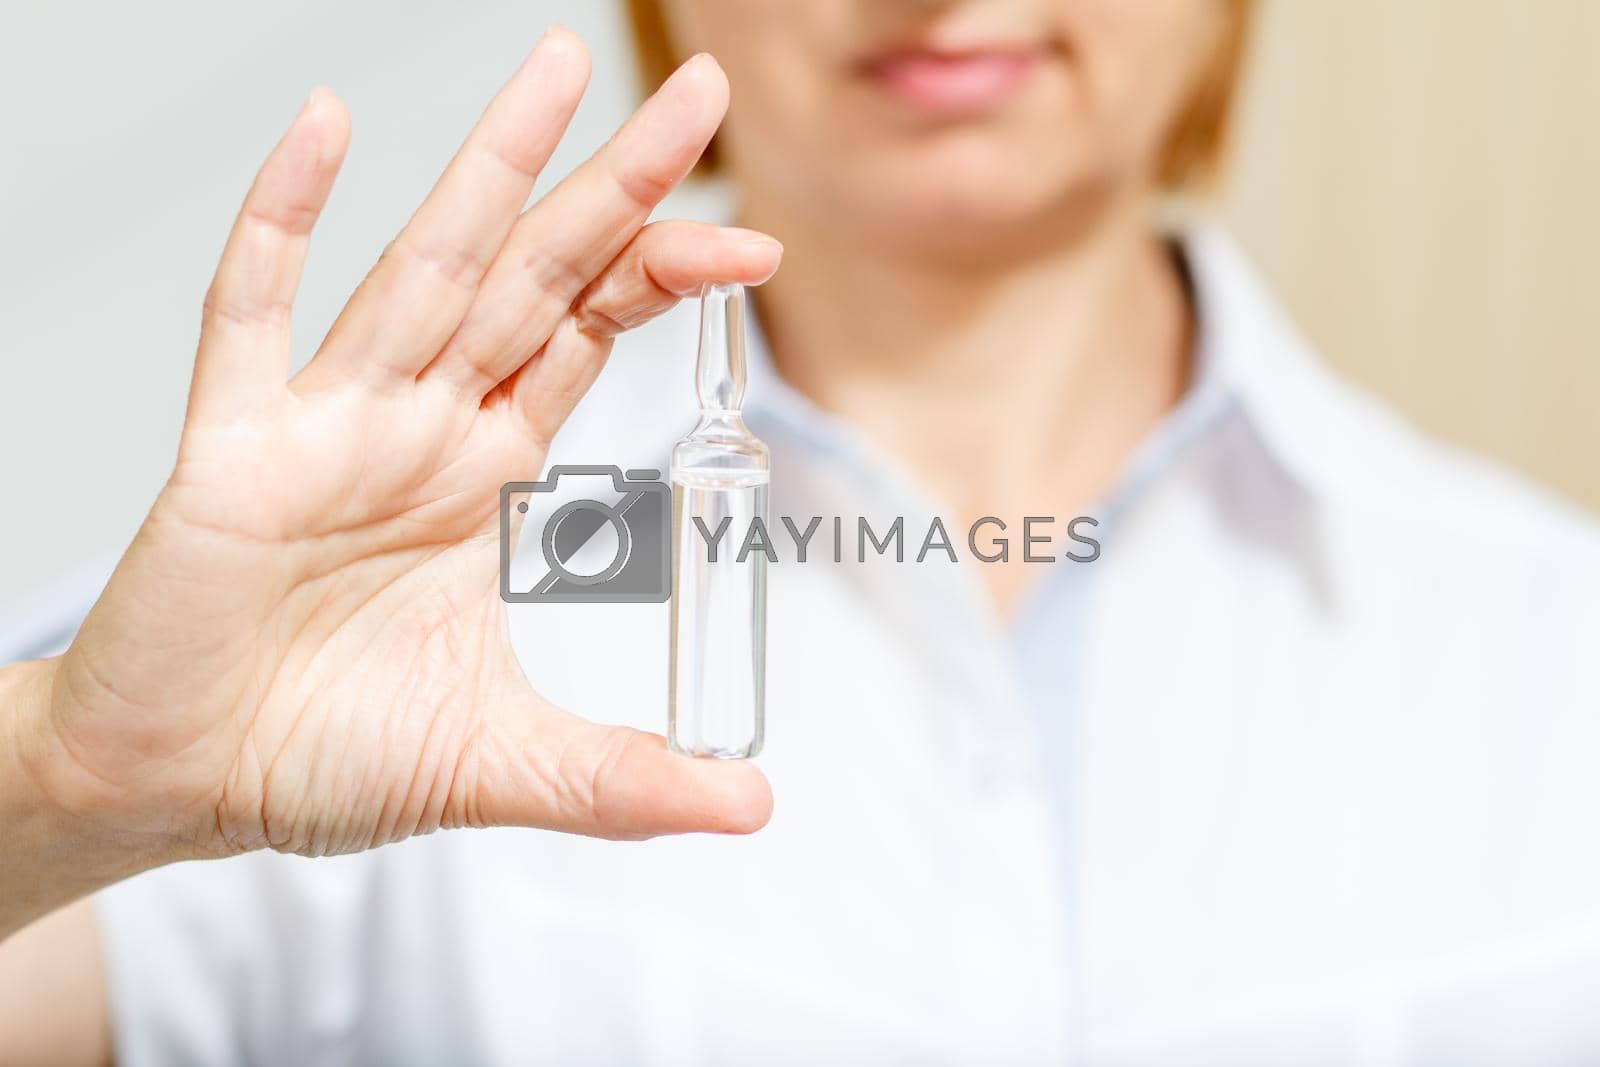 Royalty free image of Hand of female doctor with ampoule and medicine by mvg6894